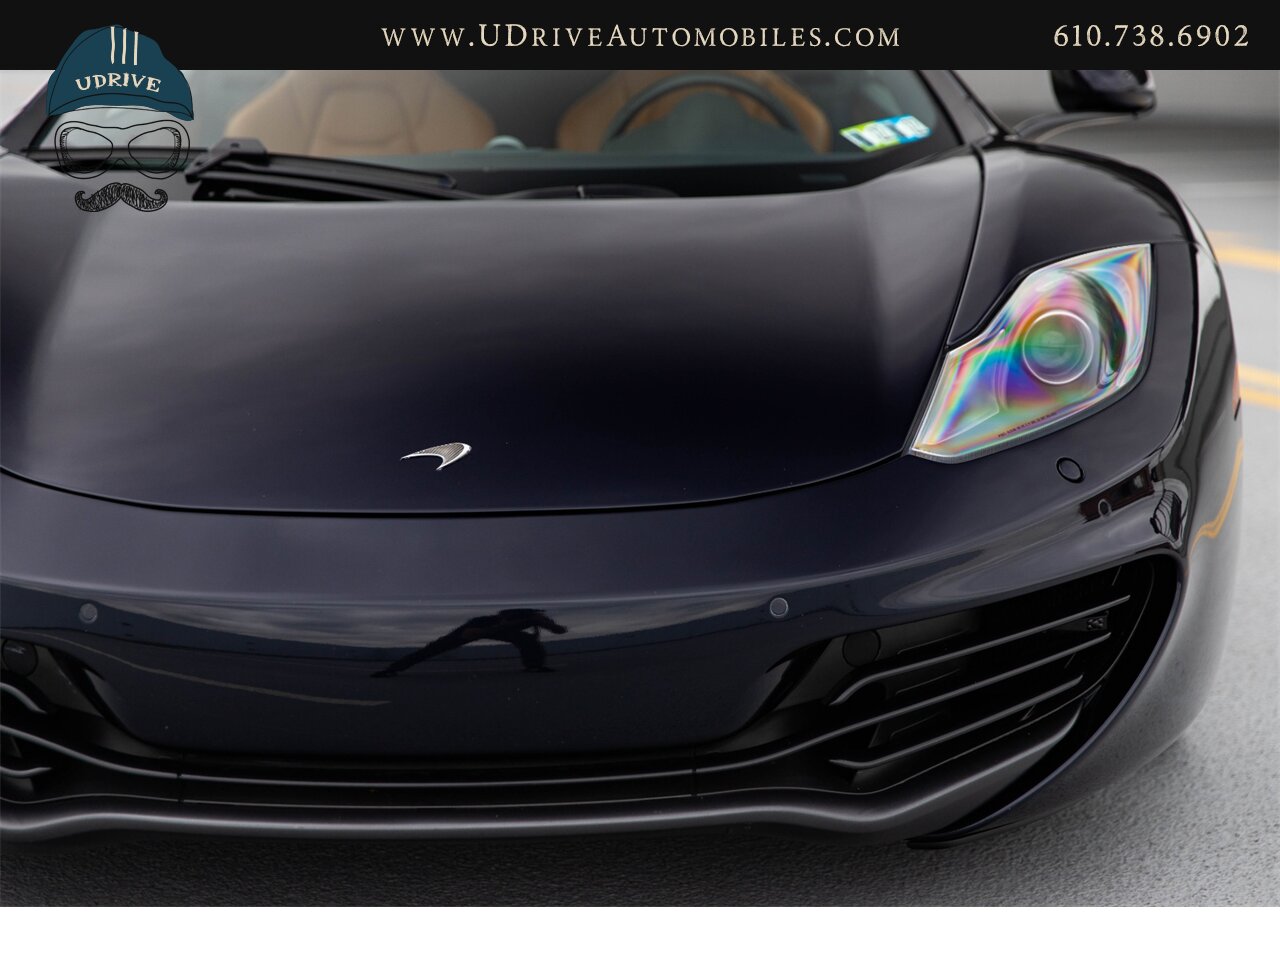 2013 McLaren MP4-12C Spider 1 Owner 6k Miles Carbon Fiber Full Leather  Sapphire Black over Natural Tan Leather - Photo 11 - West Chester, PA 19382